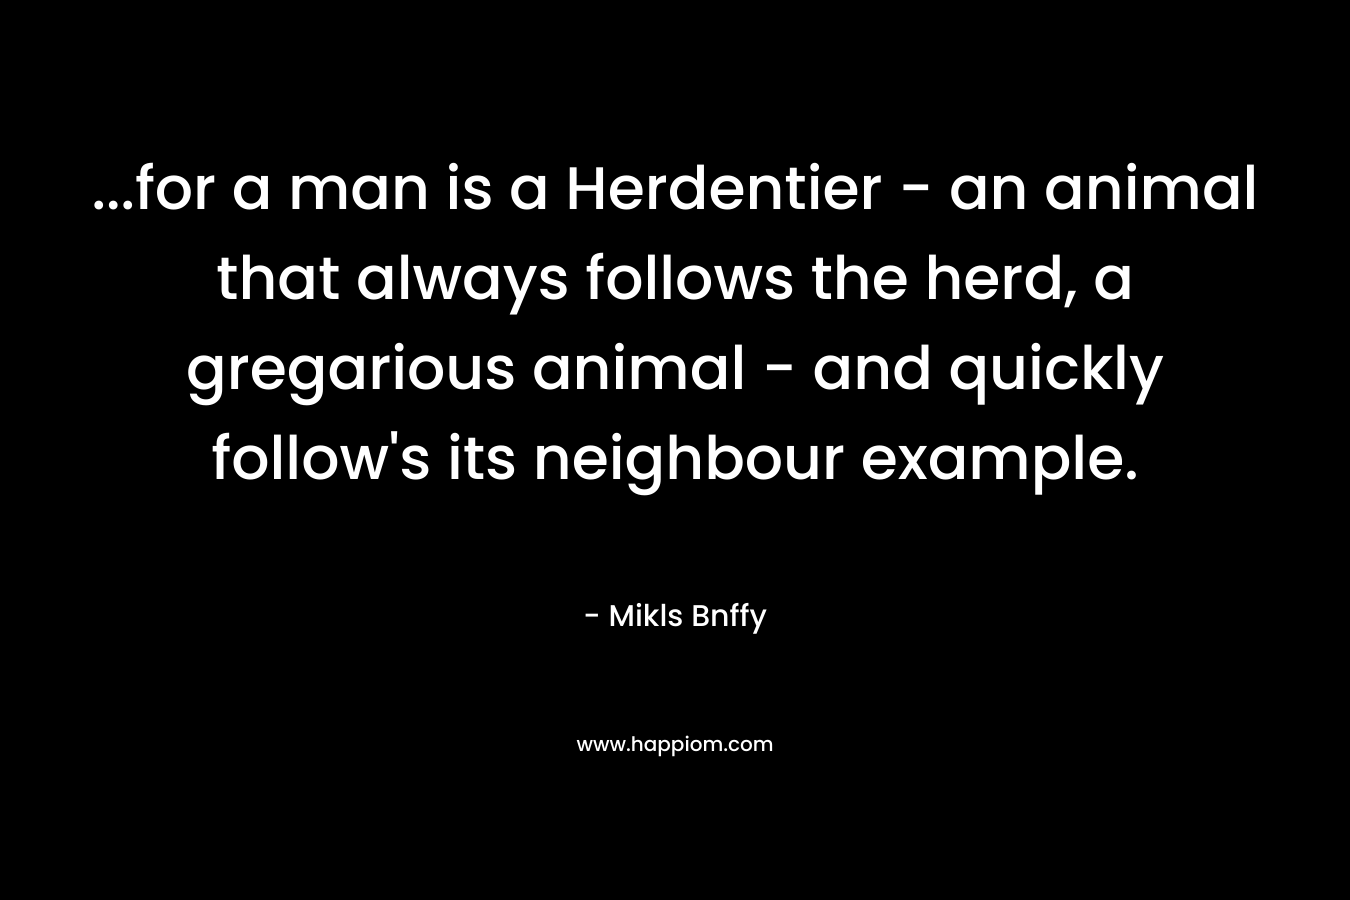 ...for a man is a Herdentier - an animal that always follows the herd, a gregarious animal - and quickly follow's its neighbour example.